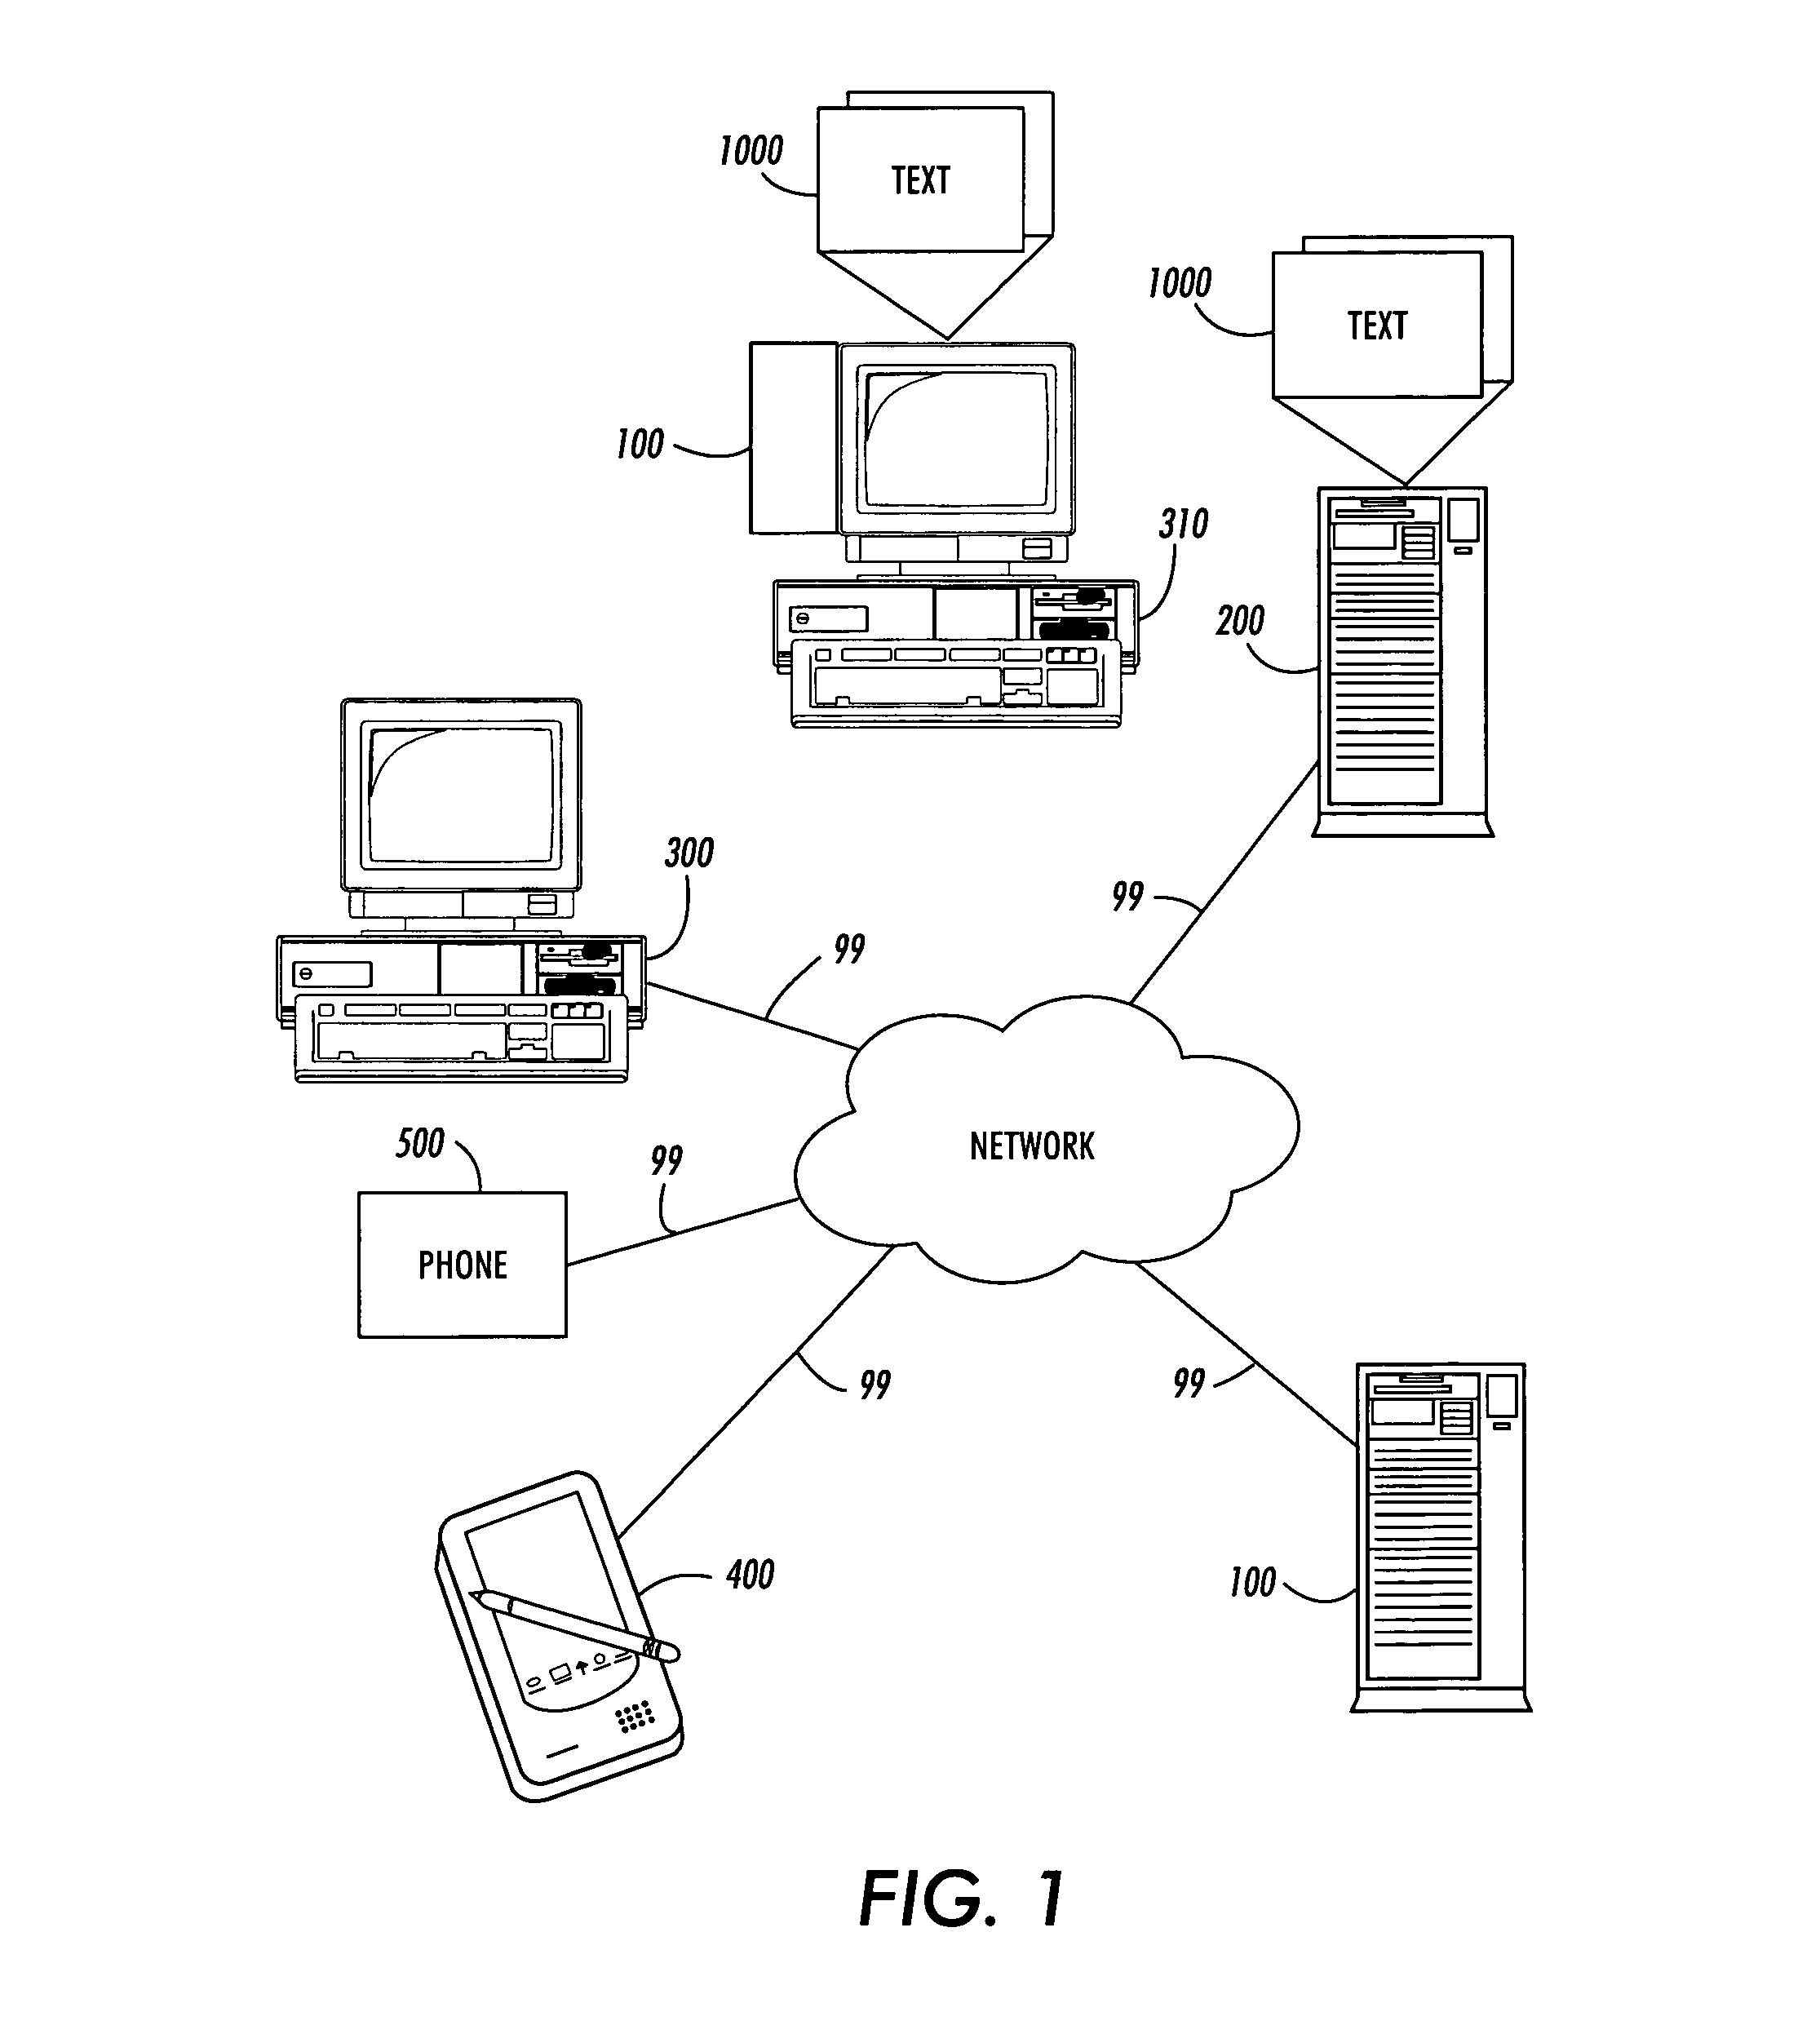 Systems and methods for displaying interactive topic-based text summaries